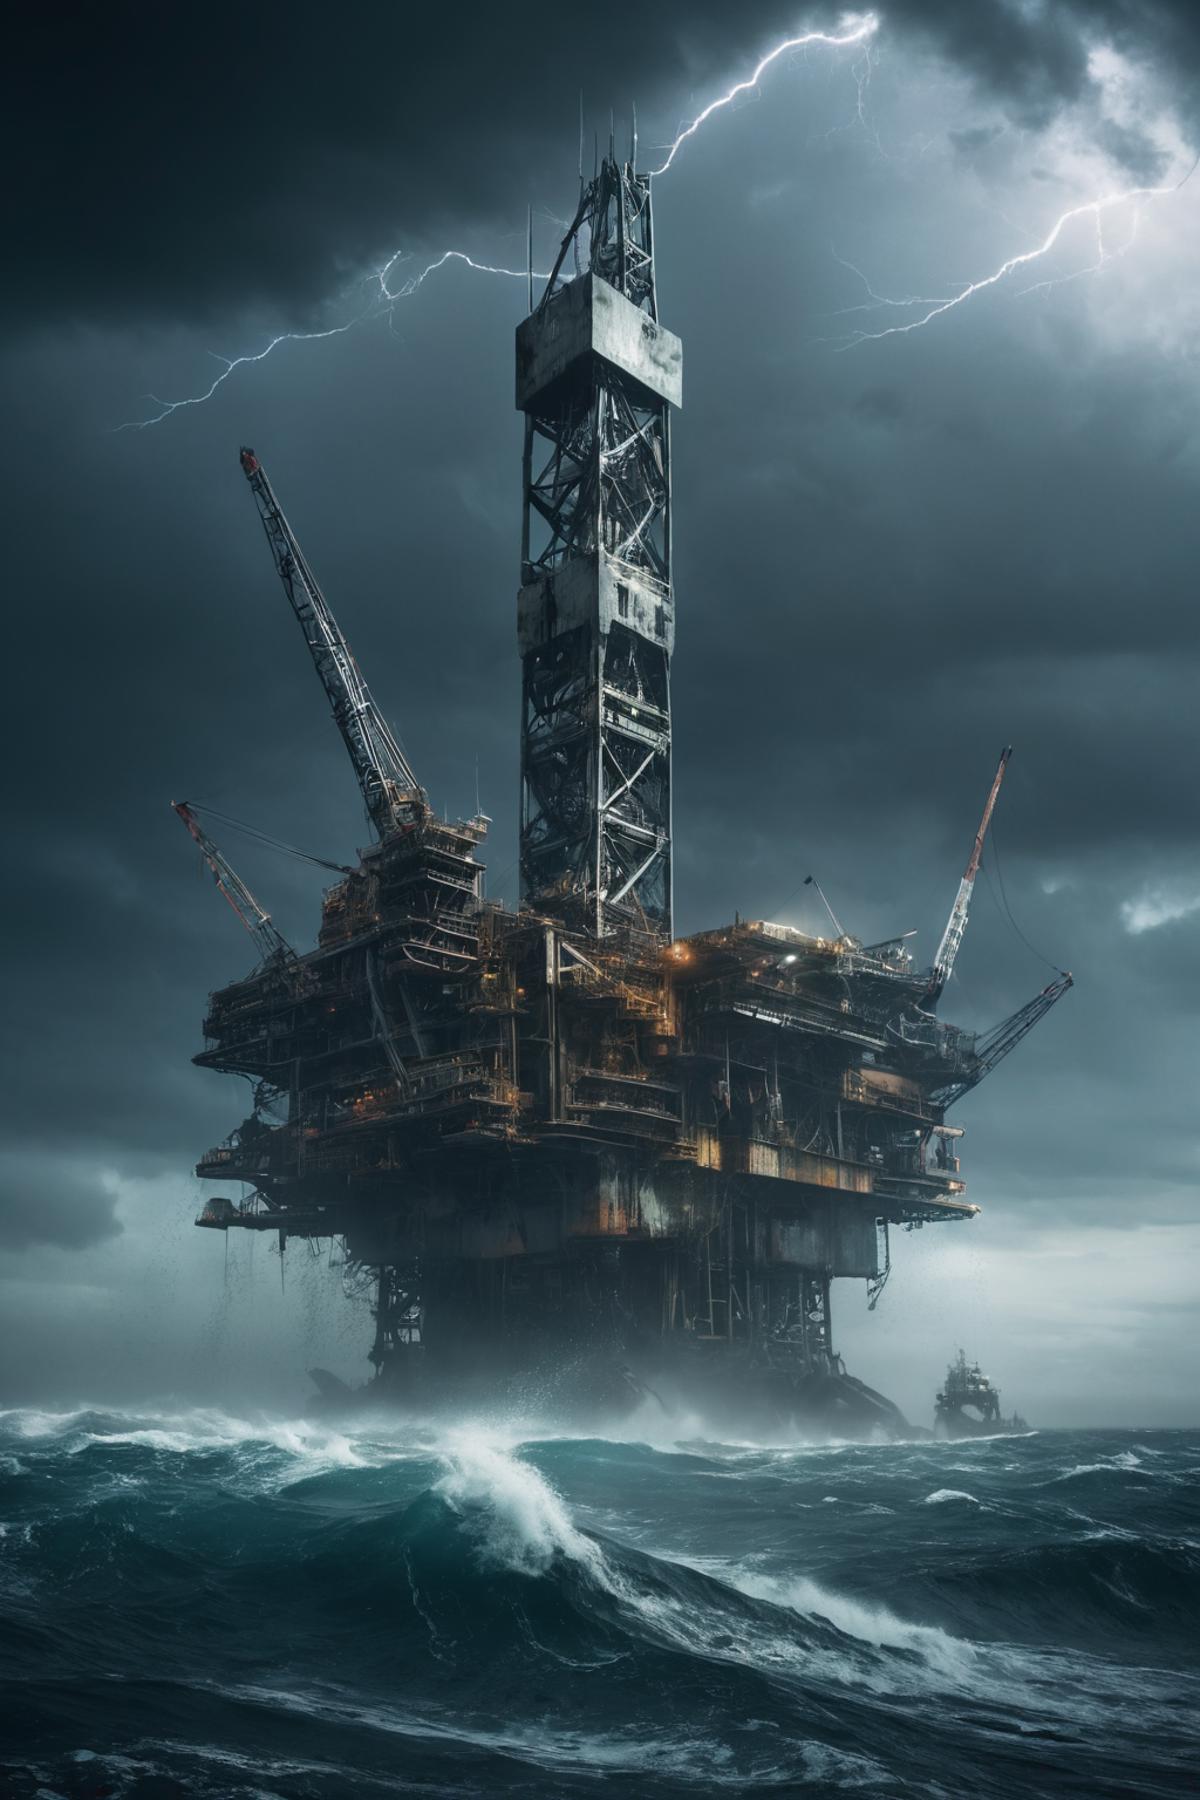 A massive offshore oil rig in the middle of a stormy sea during a storm.